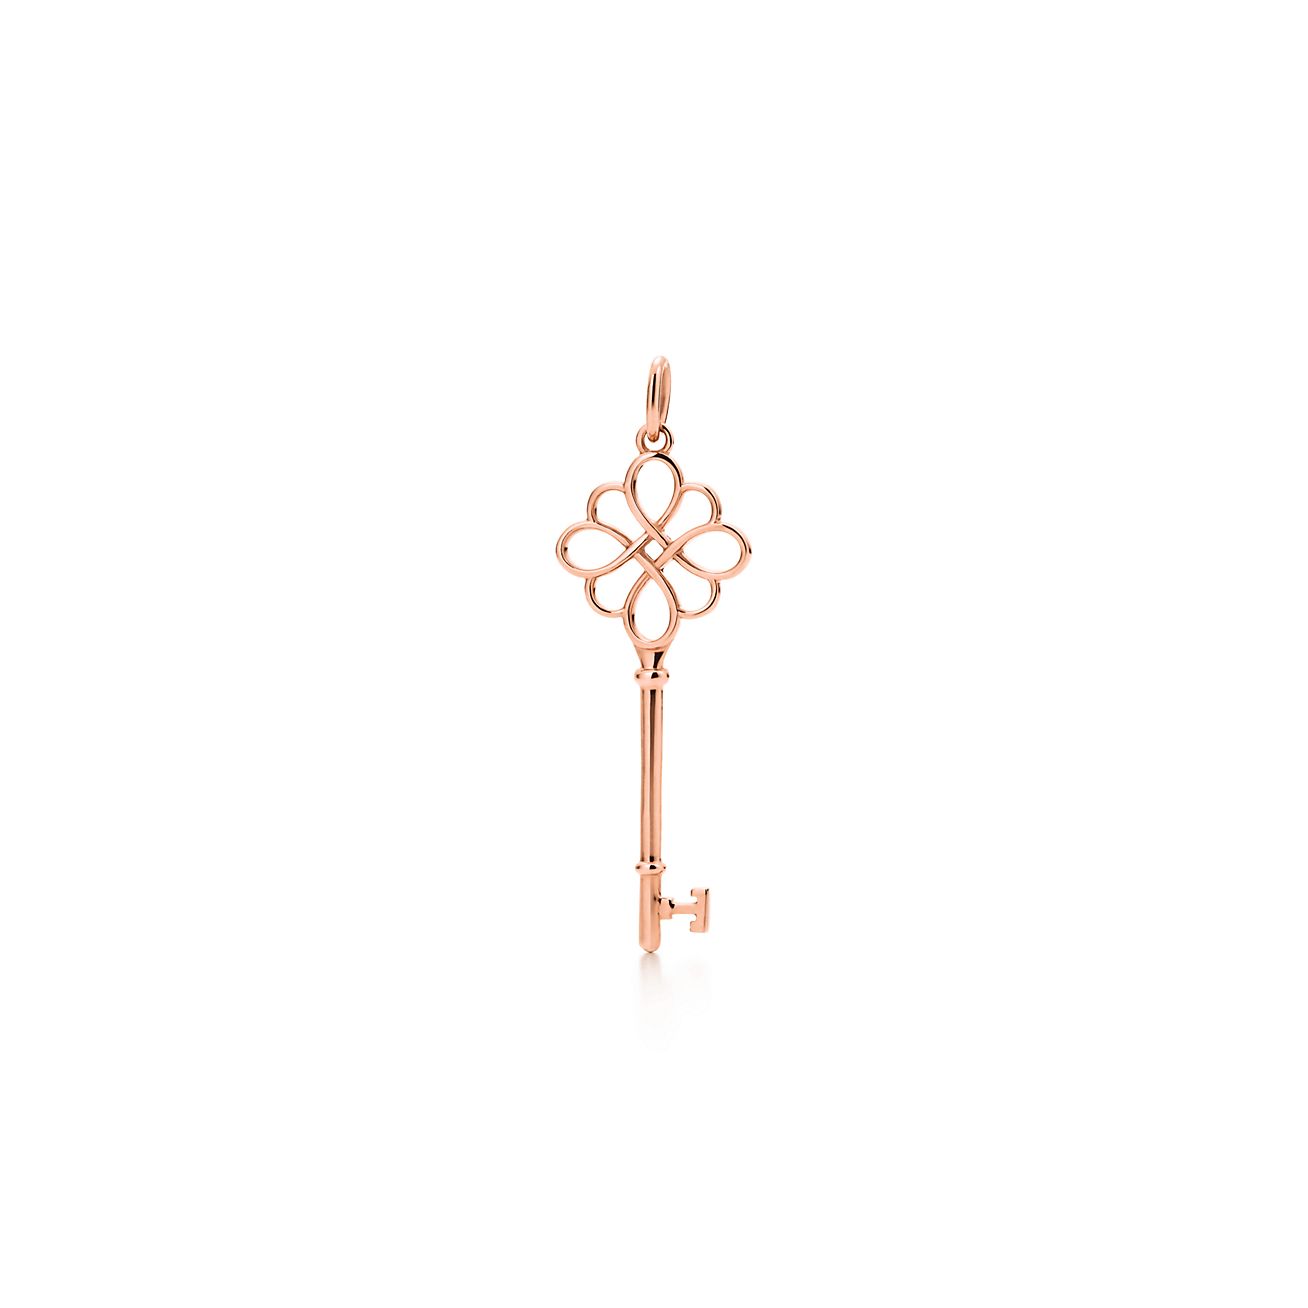 tiffany knot necklace rose gold